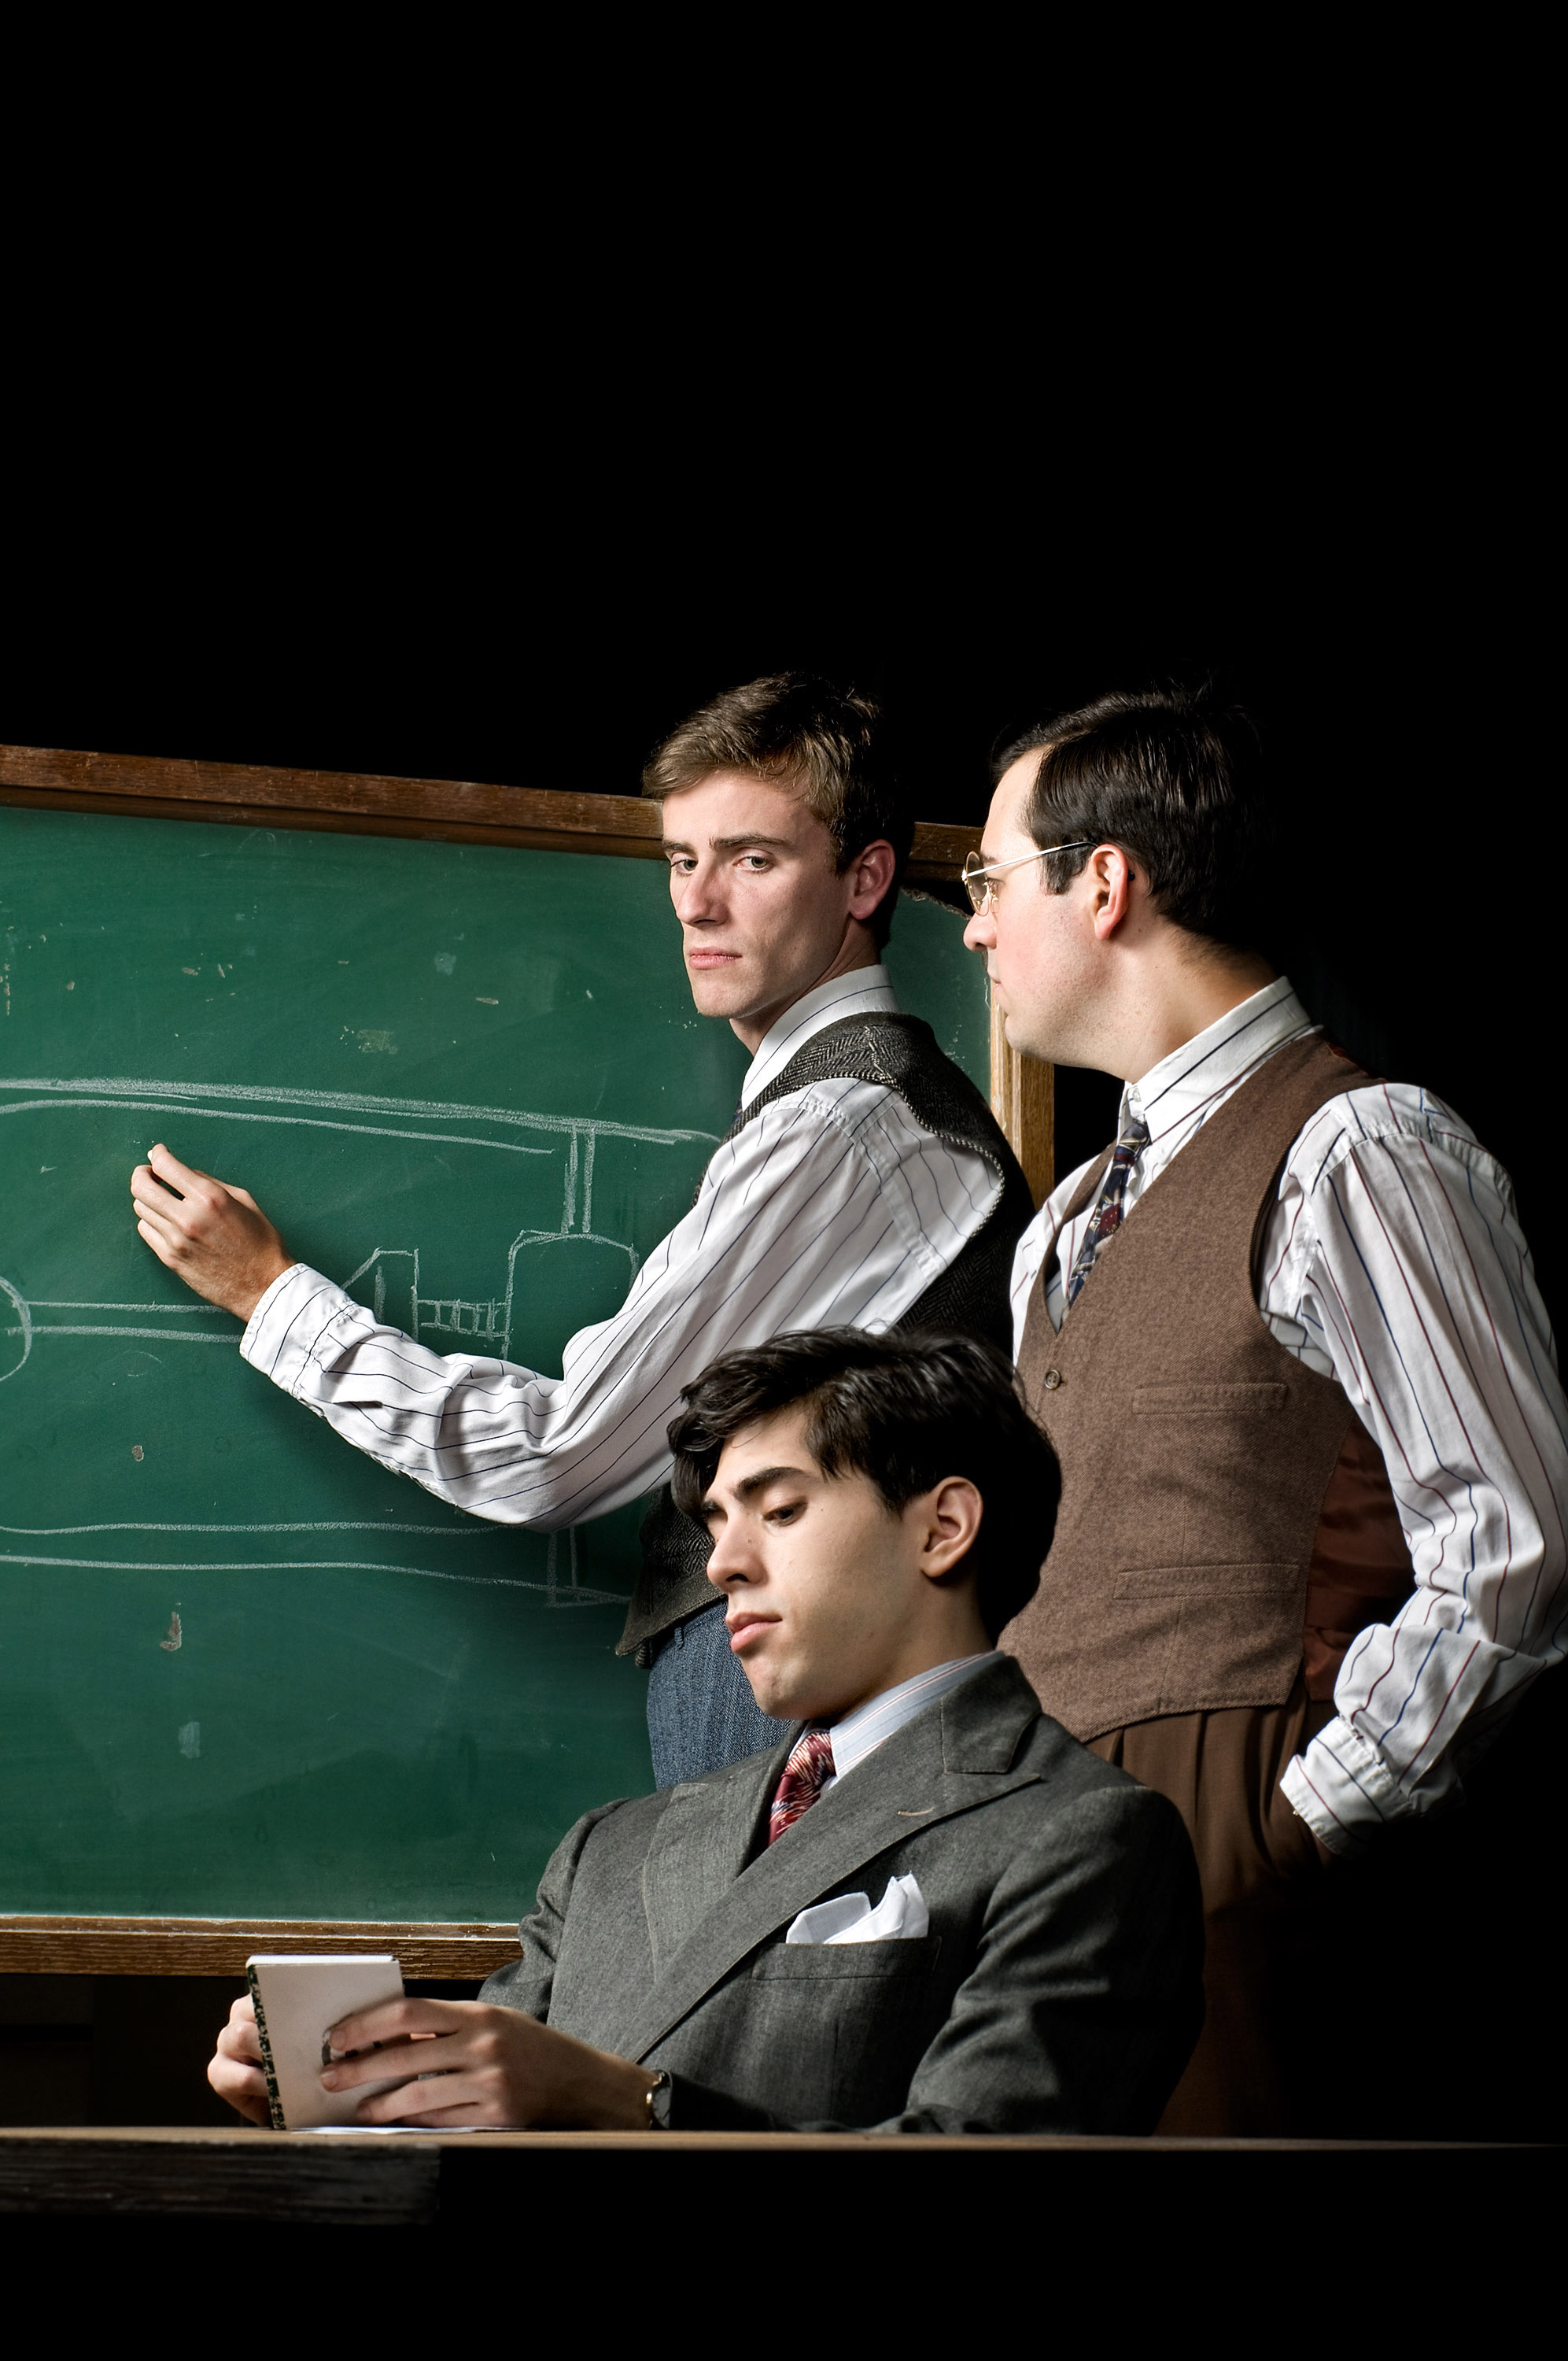 Three actors dressed in suits pose on stage with a chalkboard for a picture